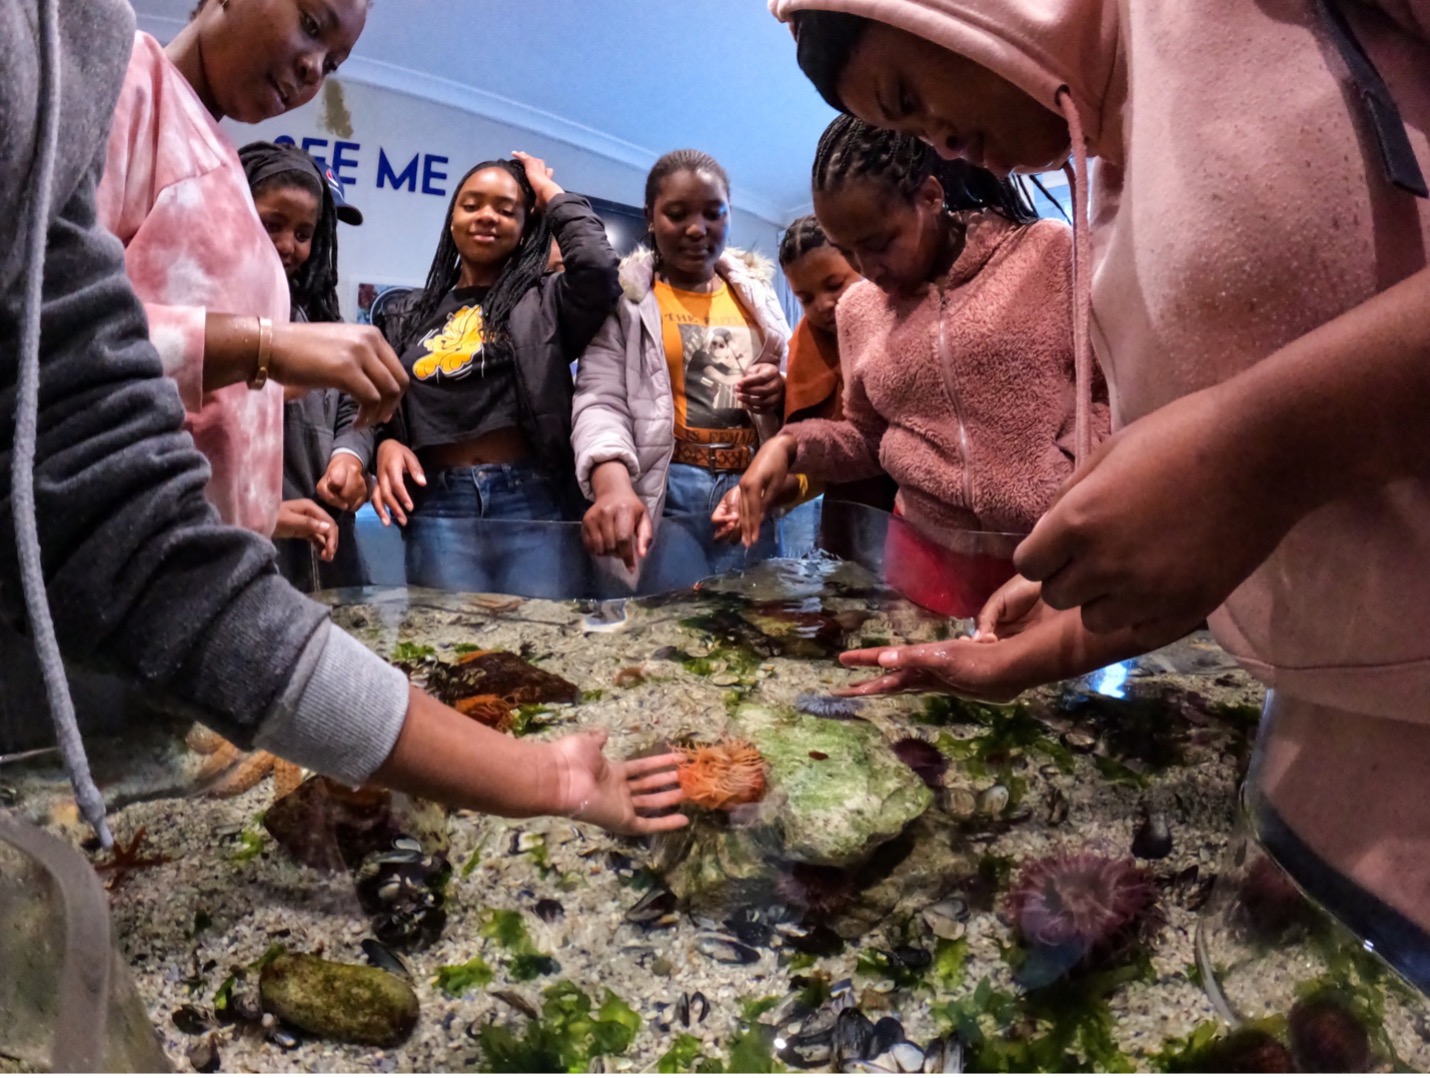 Our touch pool offers a unique opportunity for learners to interact with some of the marine life found in the rocky intertidal zone of our coast. It’s the perfect solution when the rocky shore is inaccessible due to high tides or bad weather. Image by Danel Wentzel.